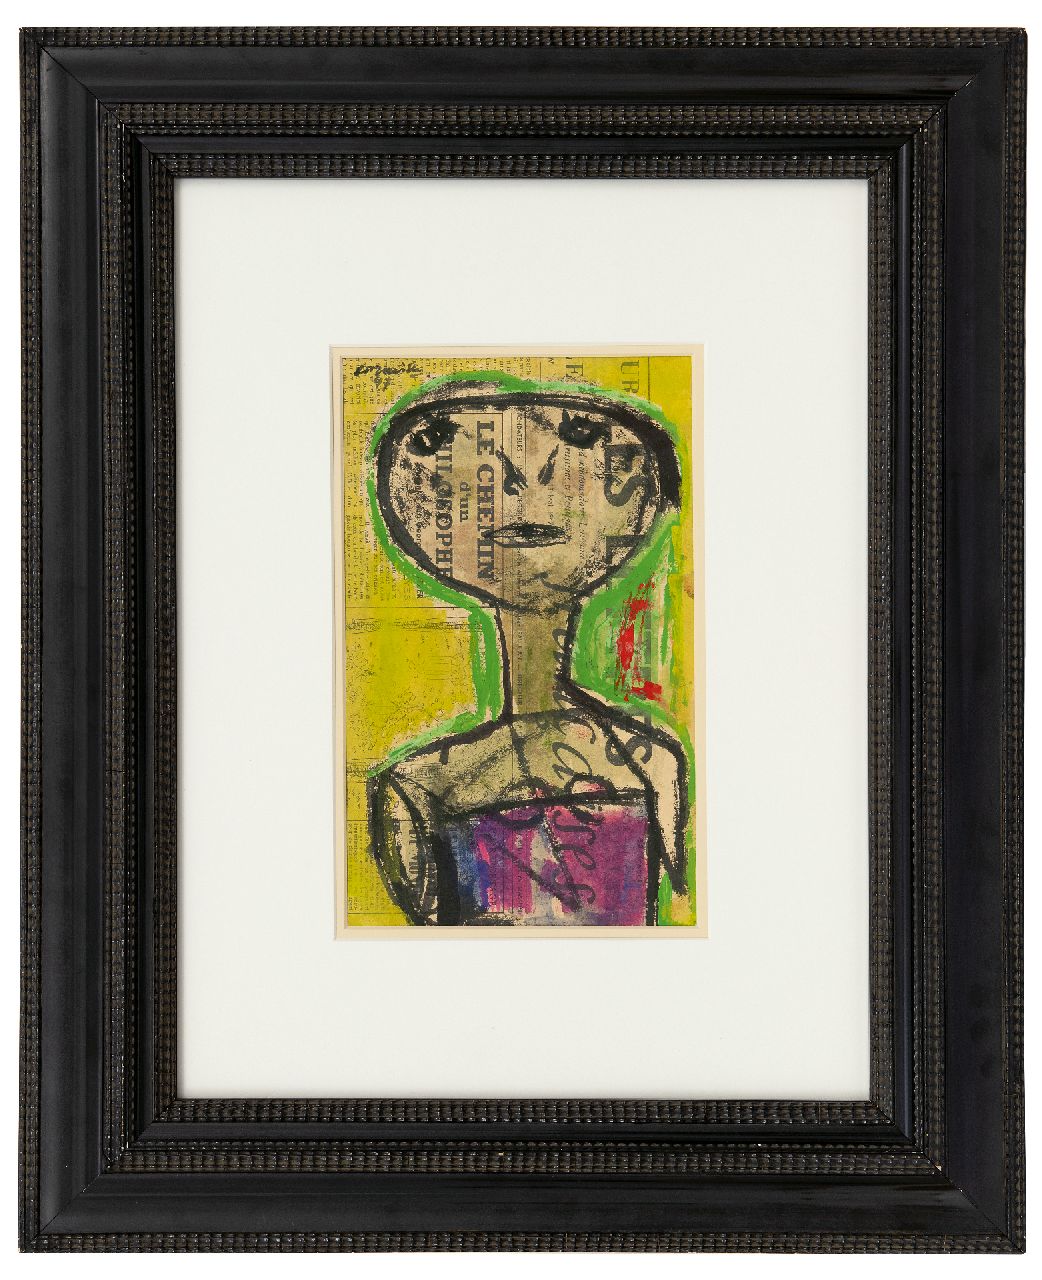 Corneille ('Corneille' Guillaume Beverloo)   | Corneille ('Corneille' Guillaume Beverloo) |  offered for sale | Le Chemin d'un Philosophe, watercolour and gouache on newspaper 34.2 x 22.1 cm, signed u.l. and dated '47